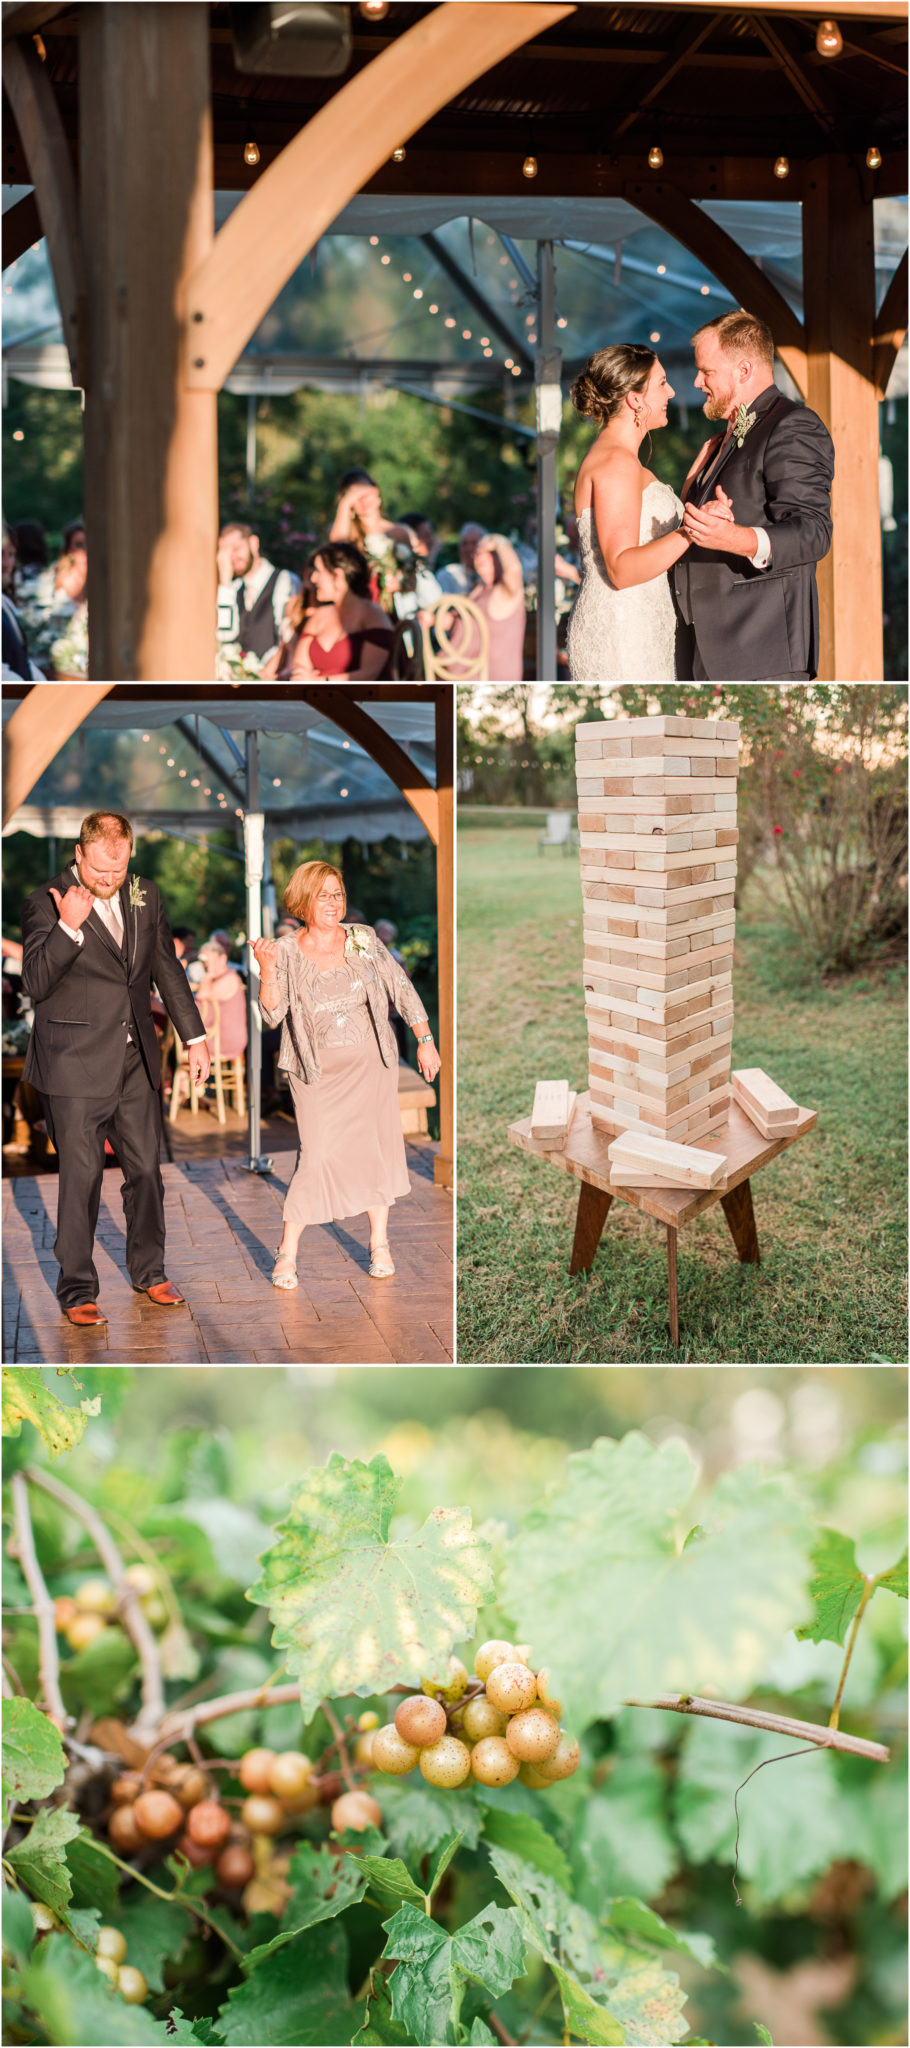 A Vineyard Wedding at Cityscape Winery Reception